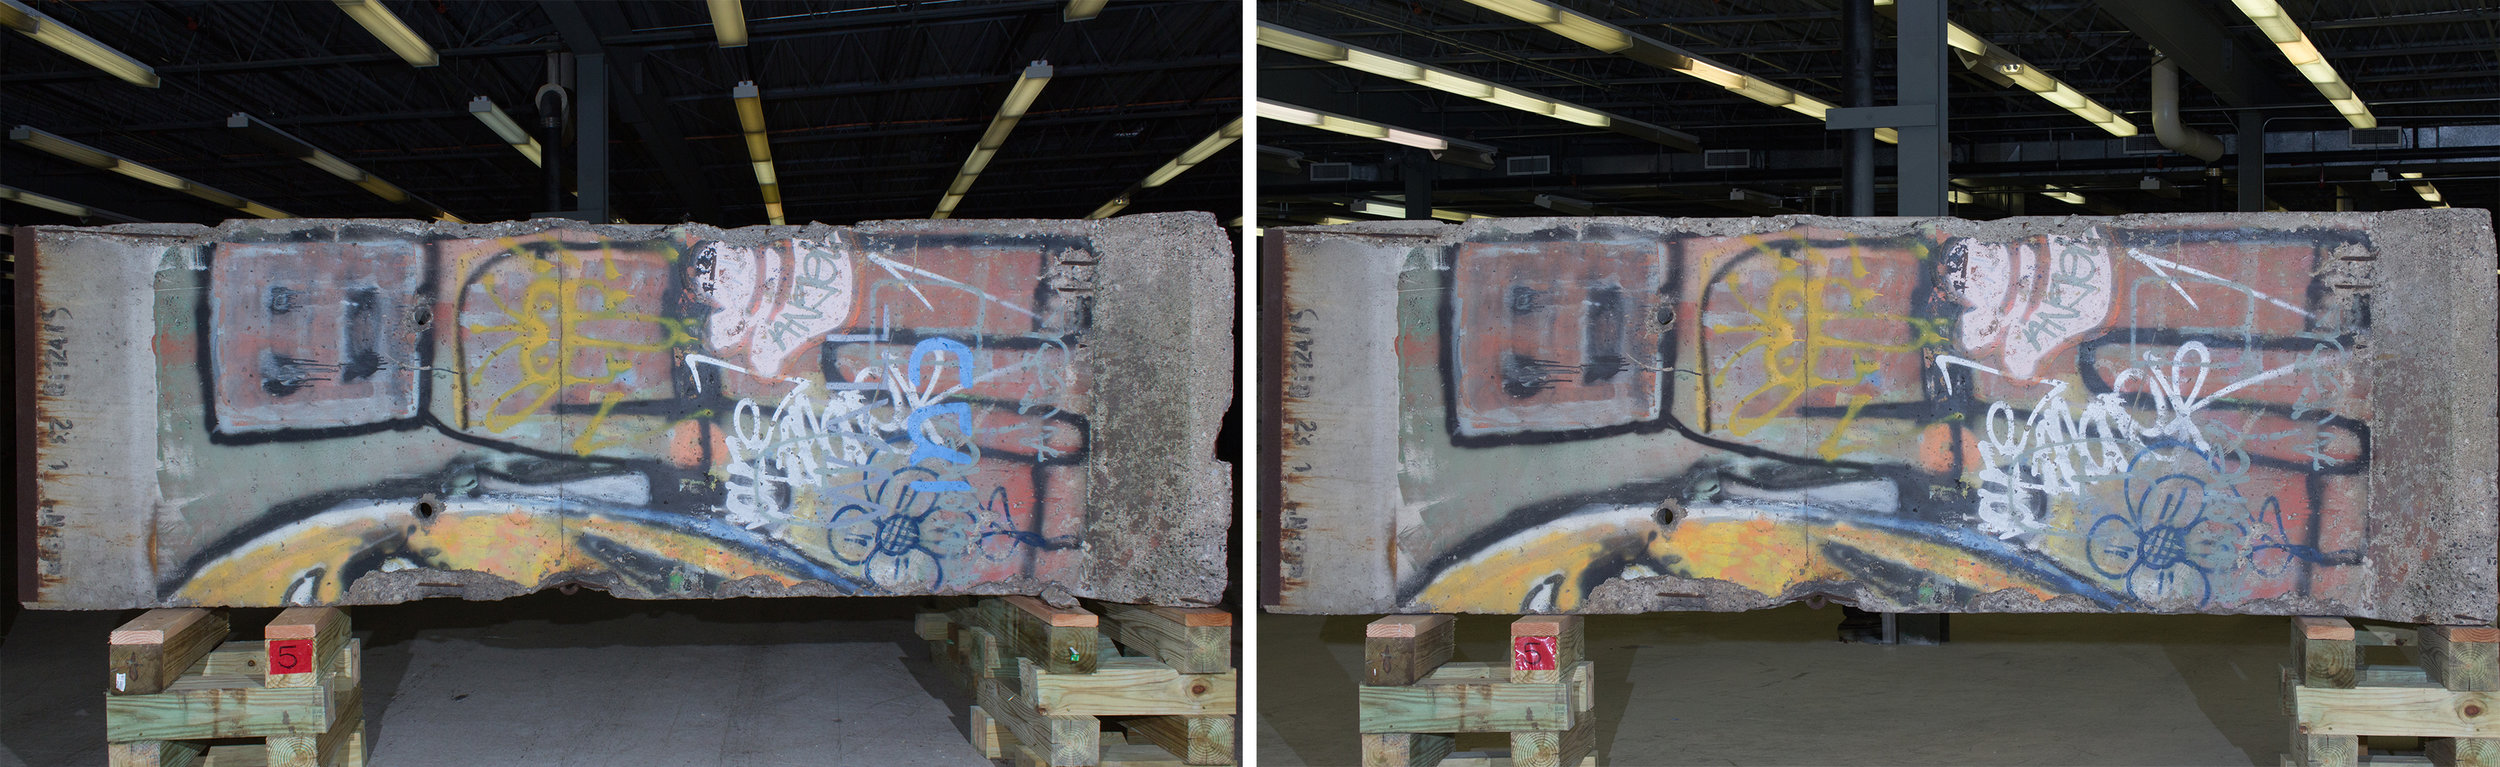  Segment 92.&nbsp;Before (left) and After conservation treatment (right).  Image © Katey Corda, 2015 